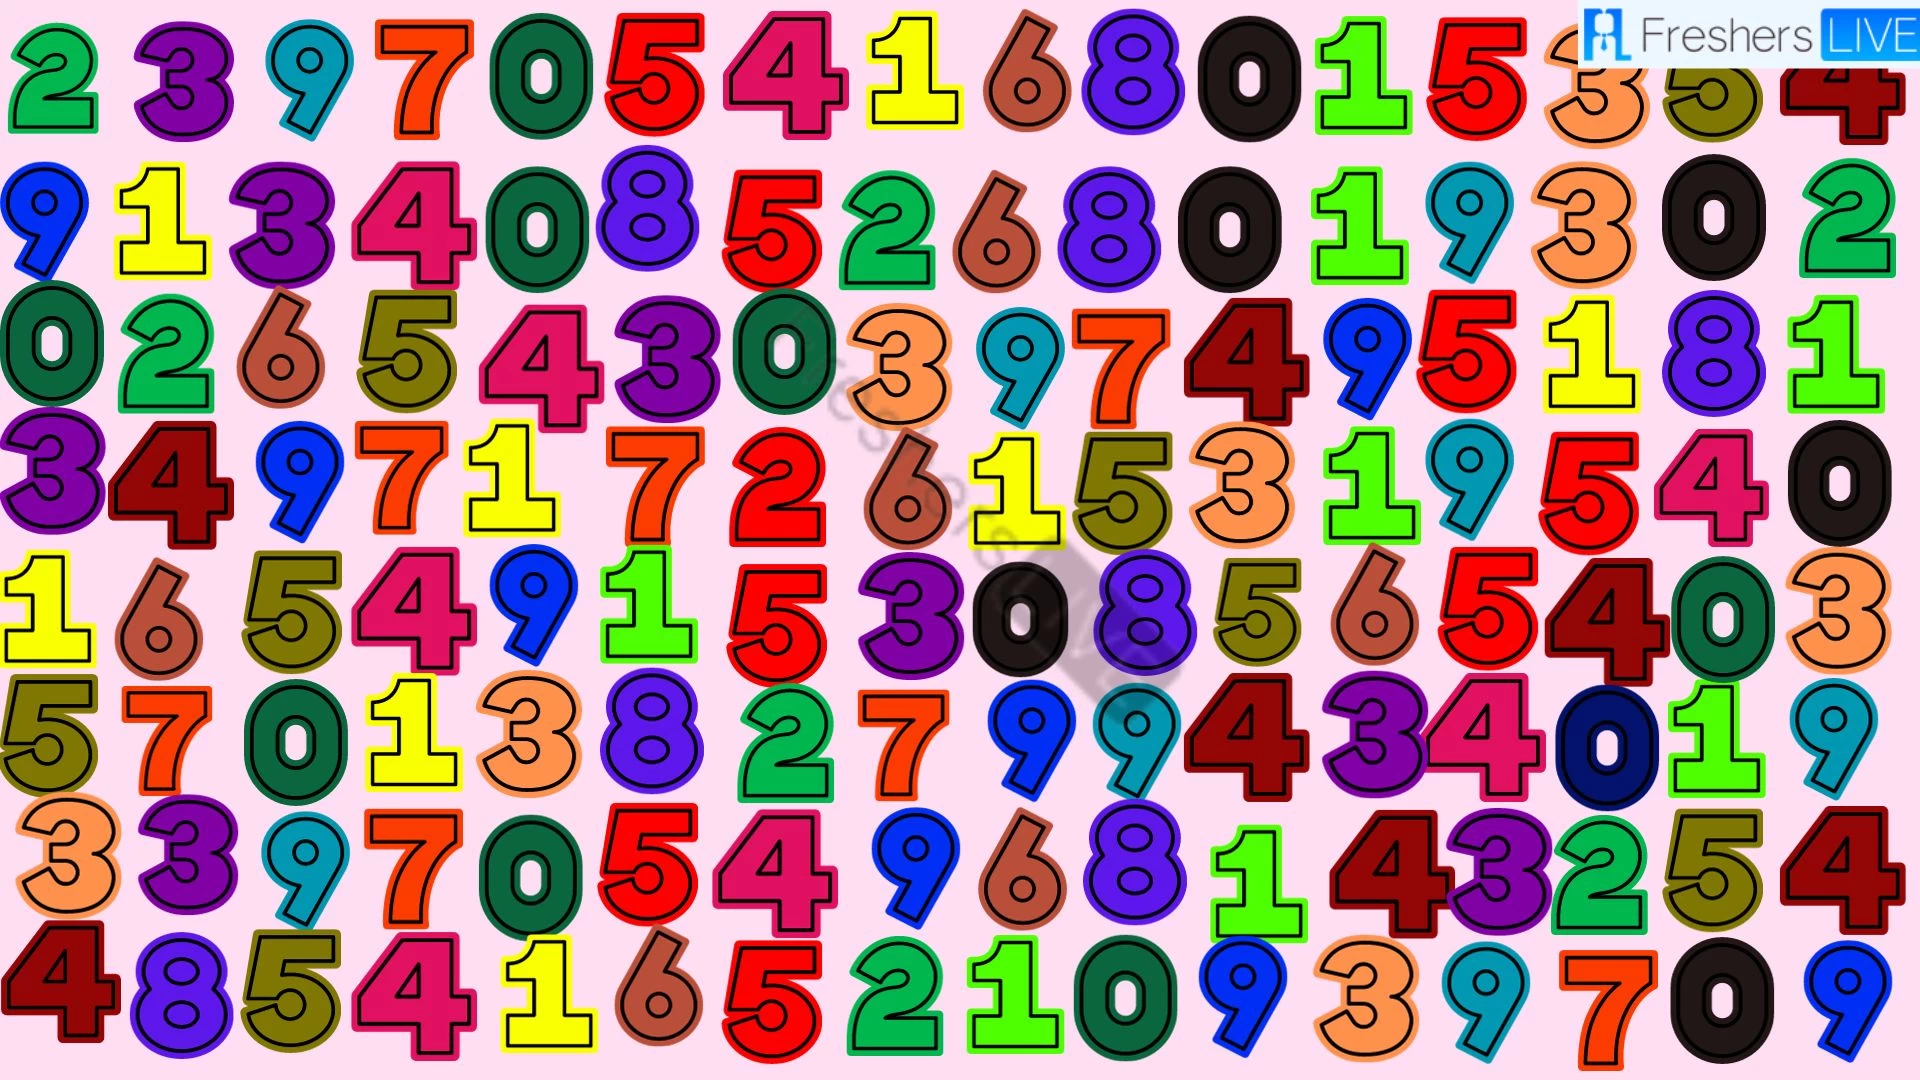 You Have A High IQ If You Can Find The Number 7984 In Less Than 10 Seconds